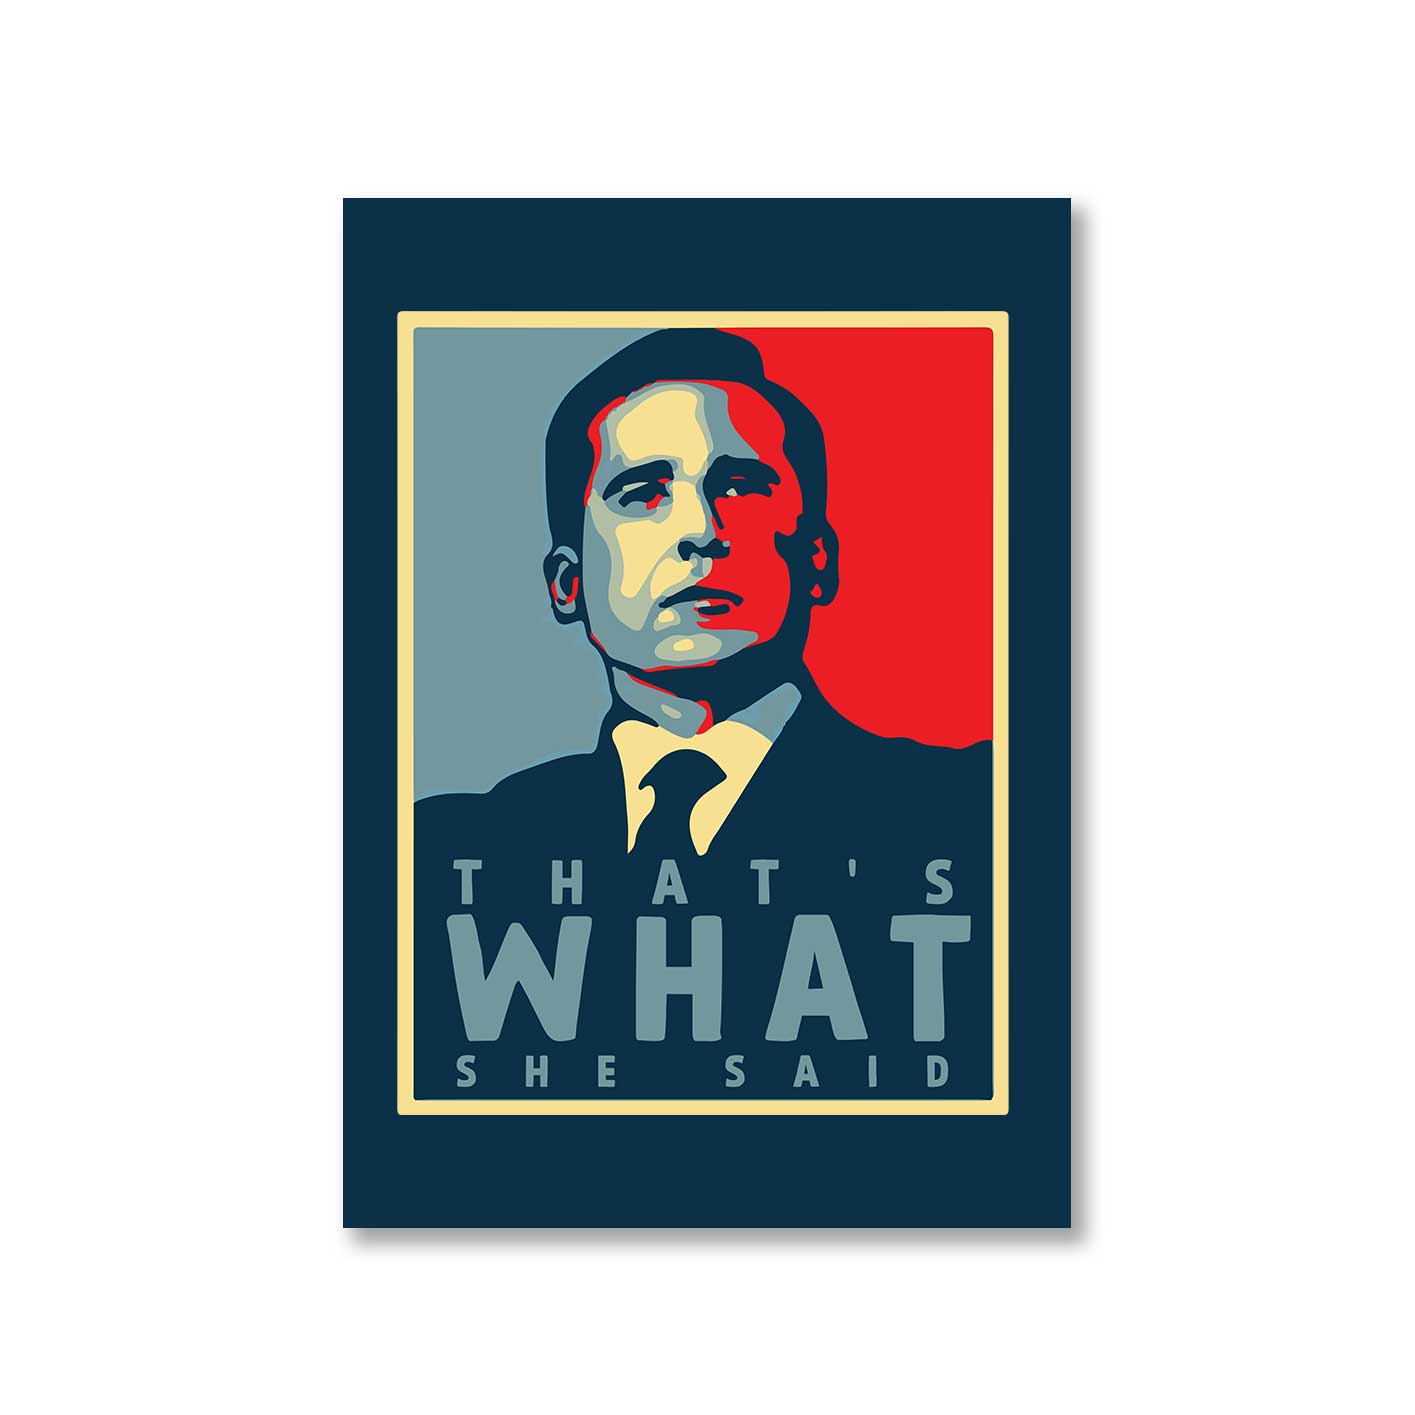 the office that's what she said poster wall art buy online united states of america usa the banyan tee tbt a4 - michael scott quote